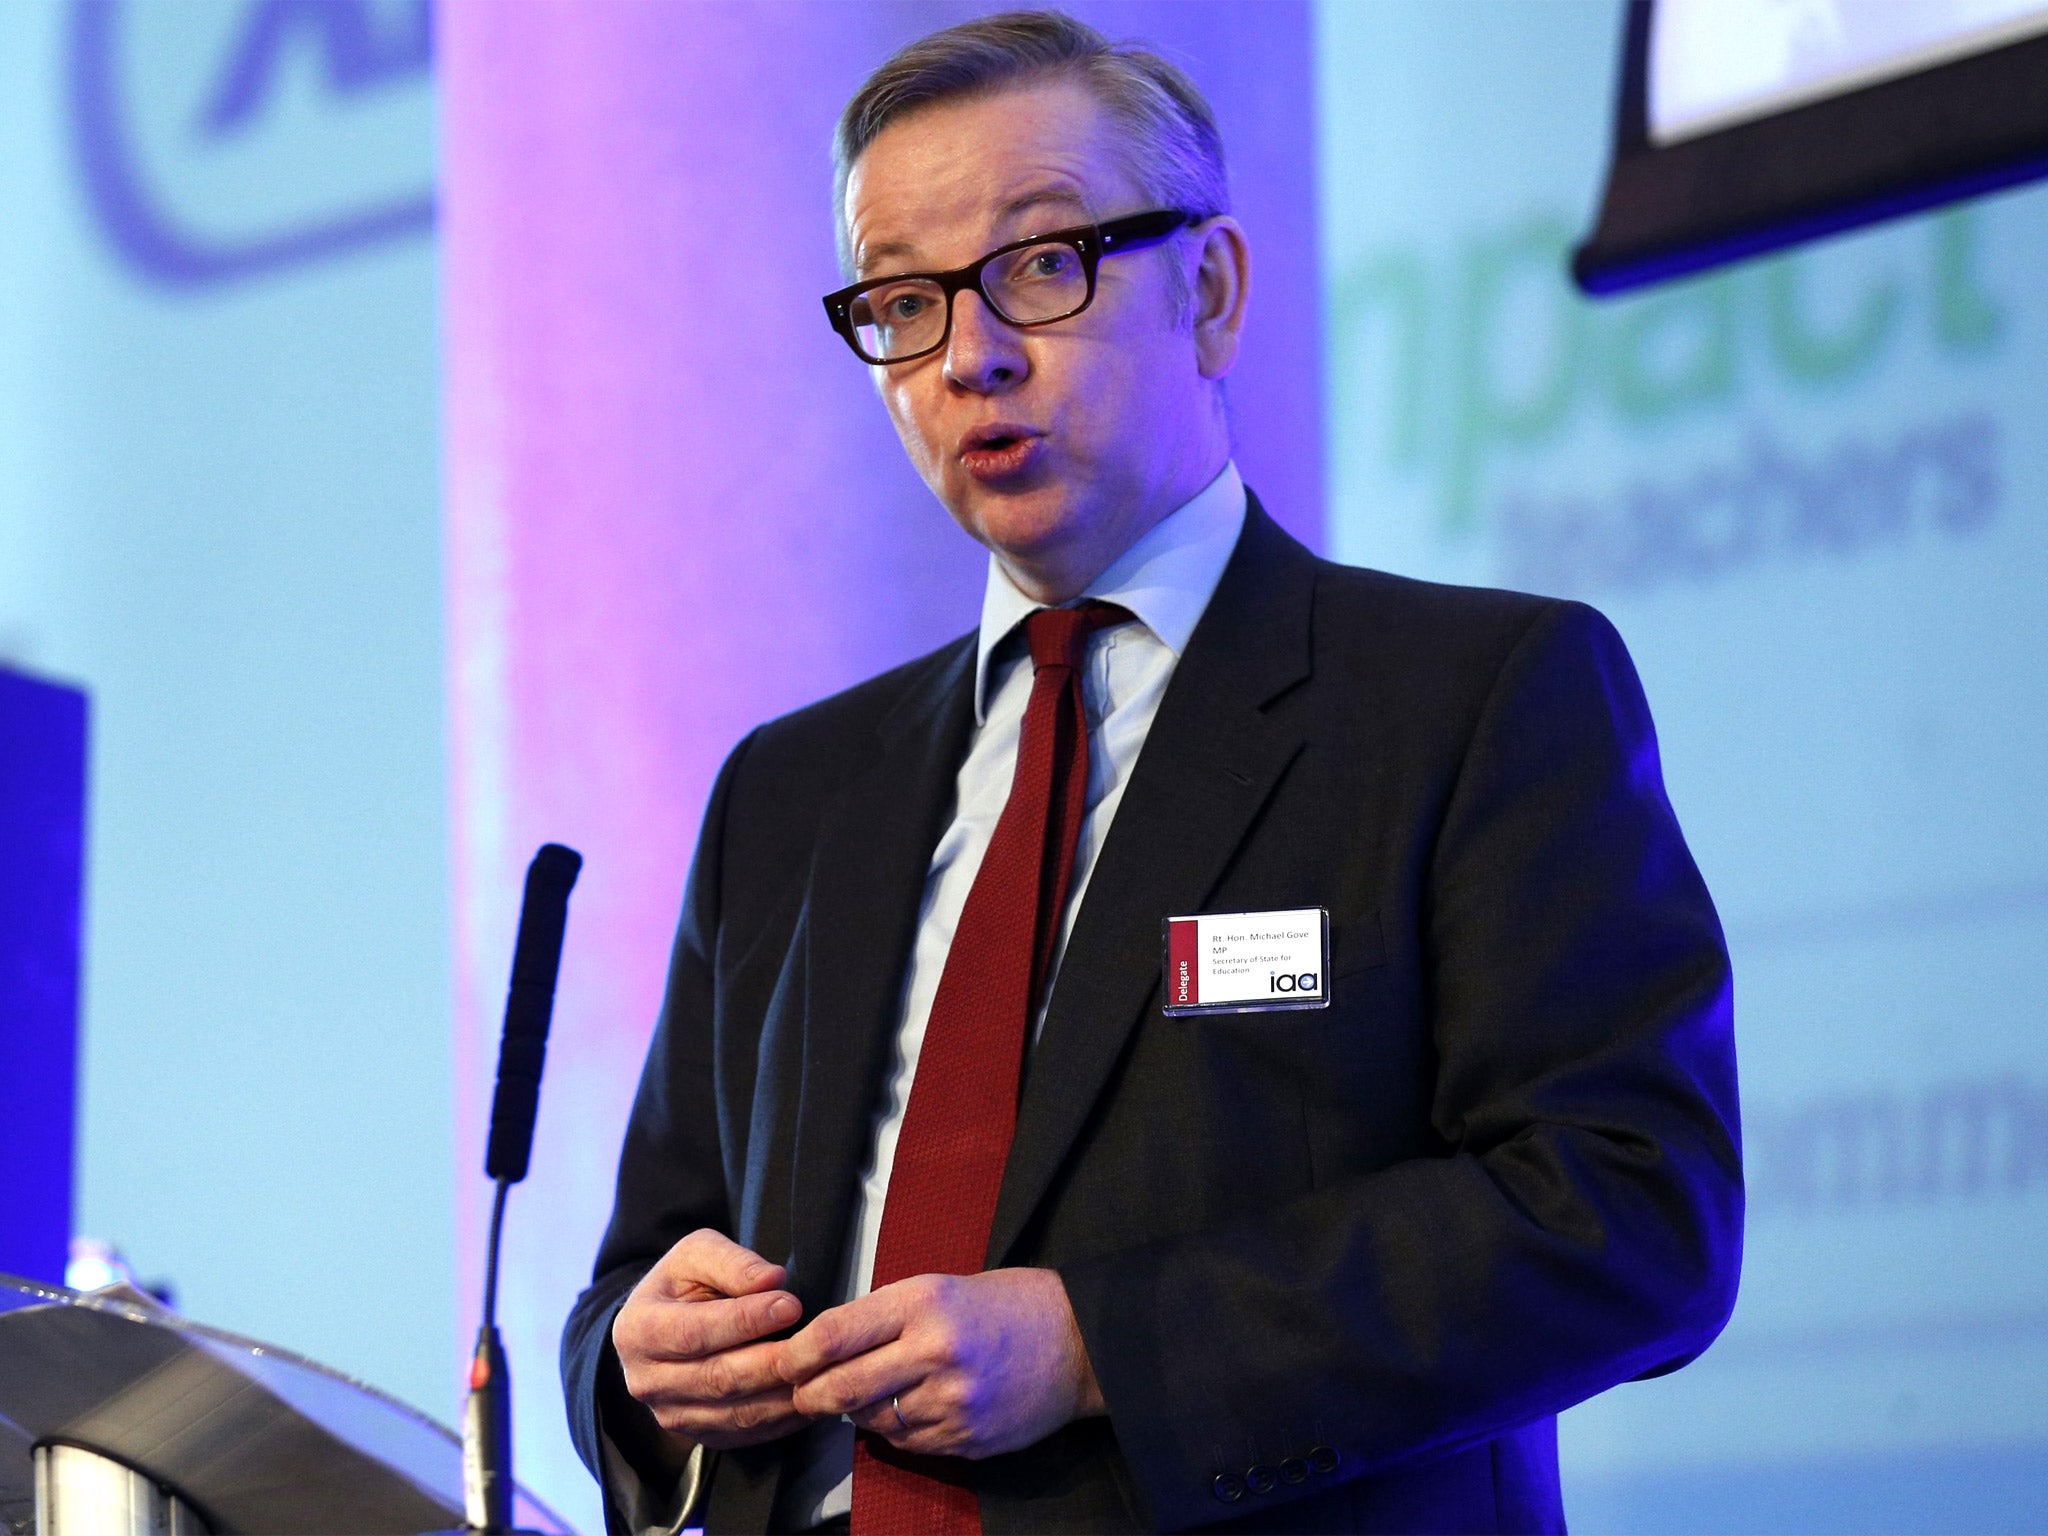 Michael Gove, the Education Secretary, wants more schools to become academies